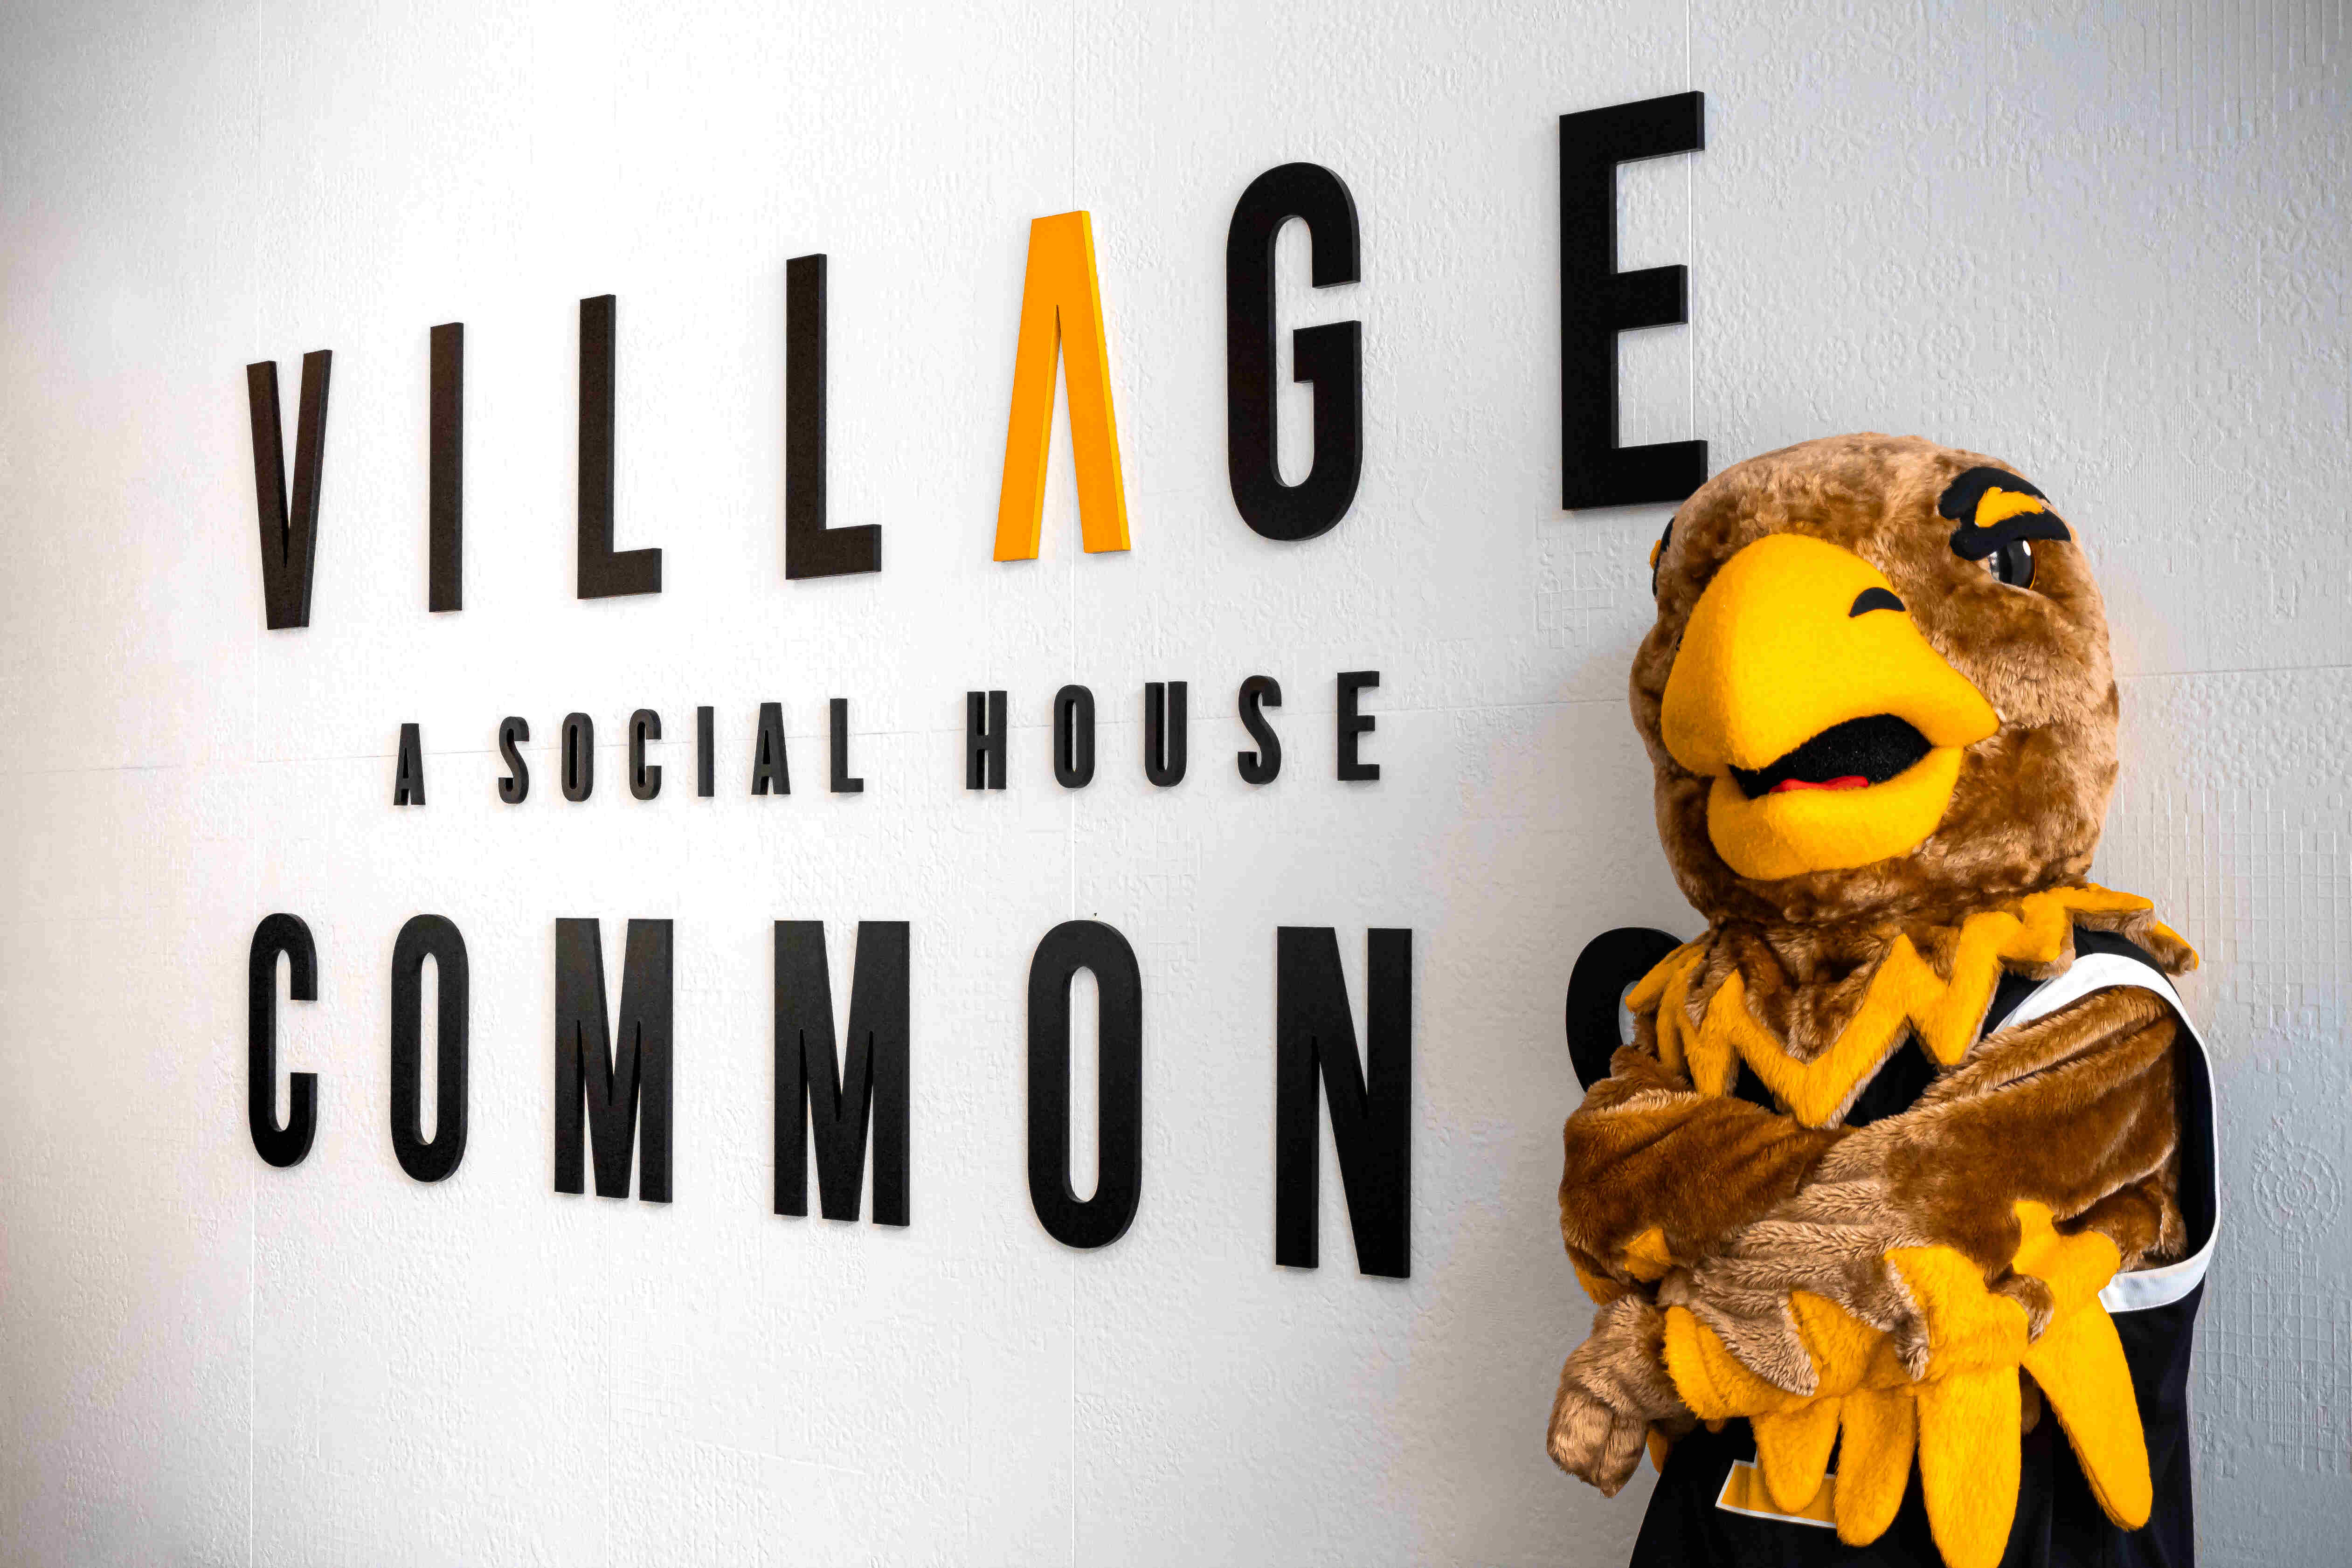 Village Commons. A social house. Eddie the Golden Eagle posing next to the sign.